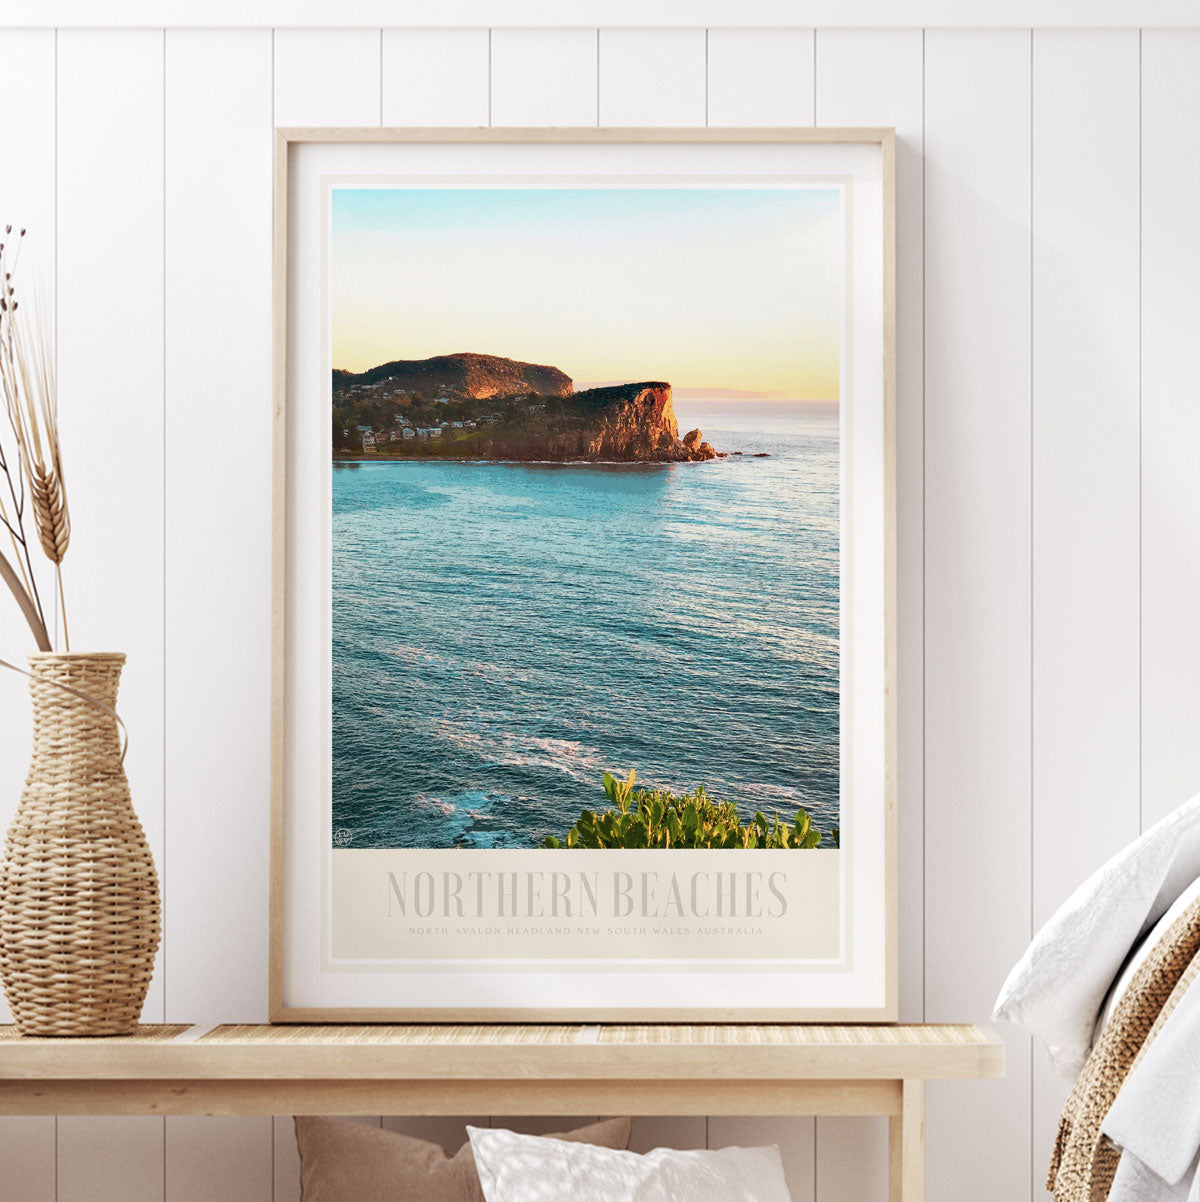 northern Beaches Sydney retro vintage travel poster from Places We Luv